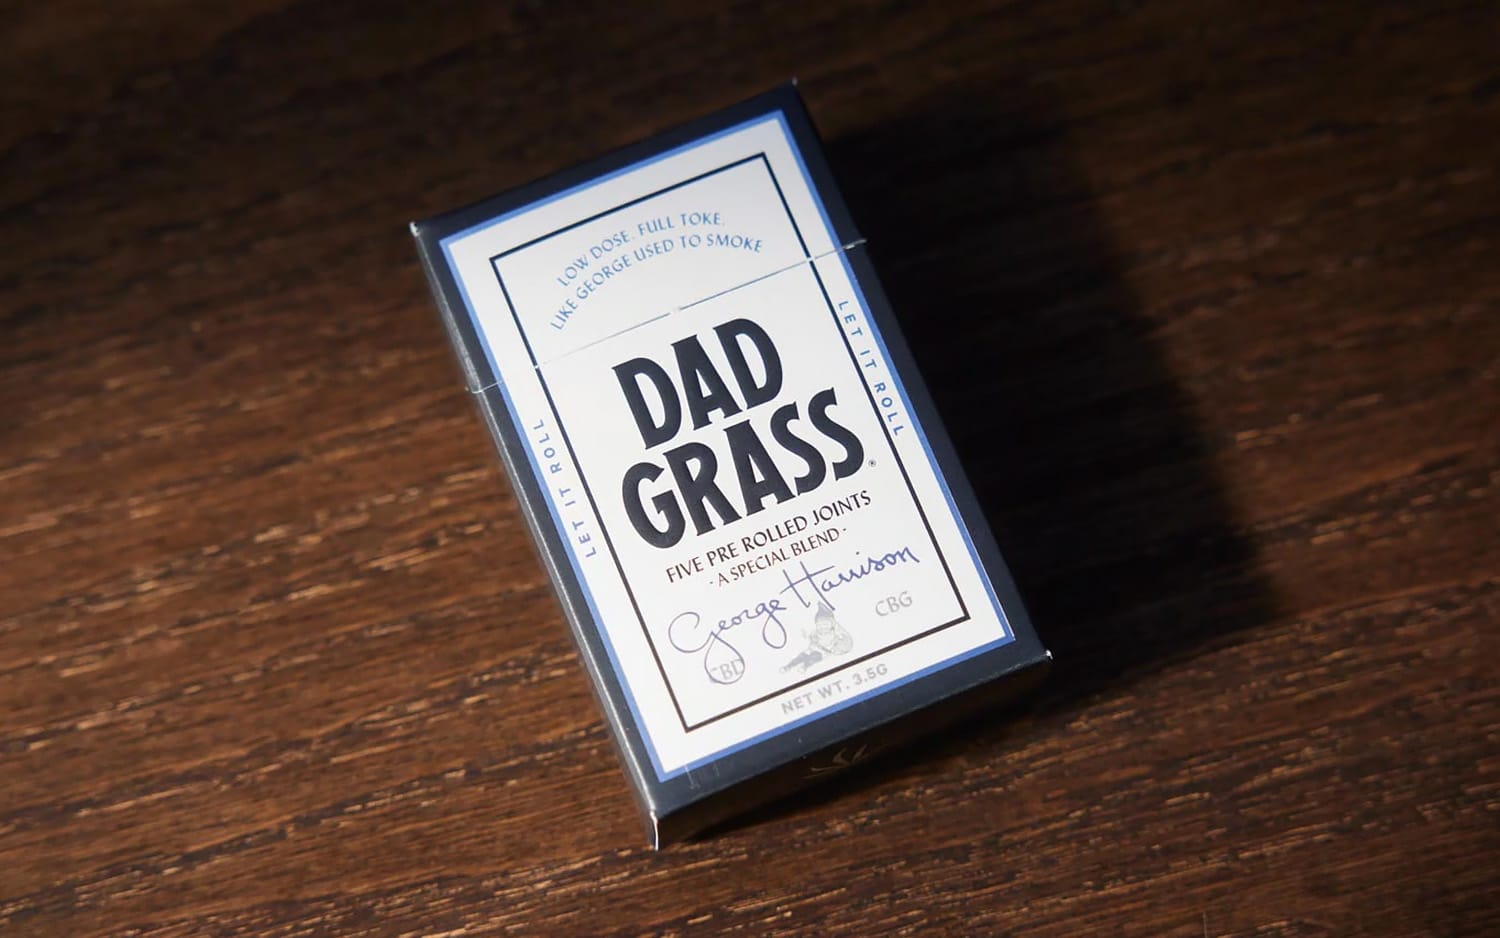 Dad Grass x George Harrison "All Things Must Grass" Collection